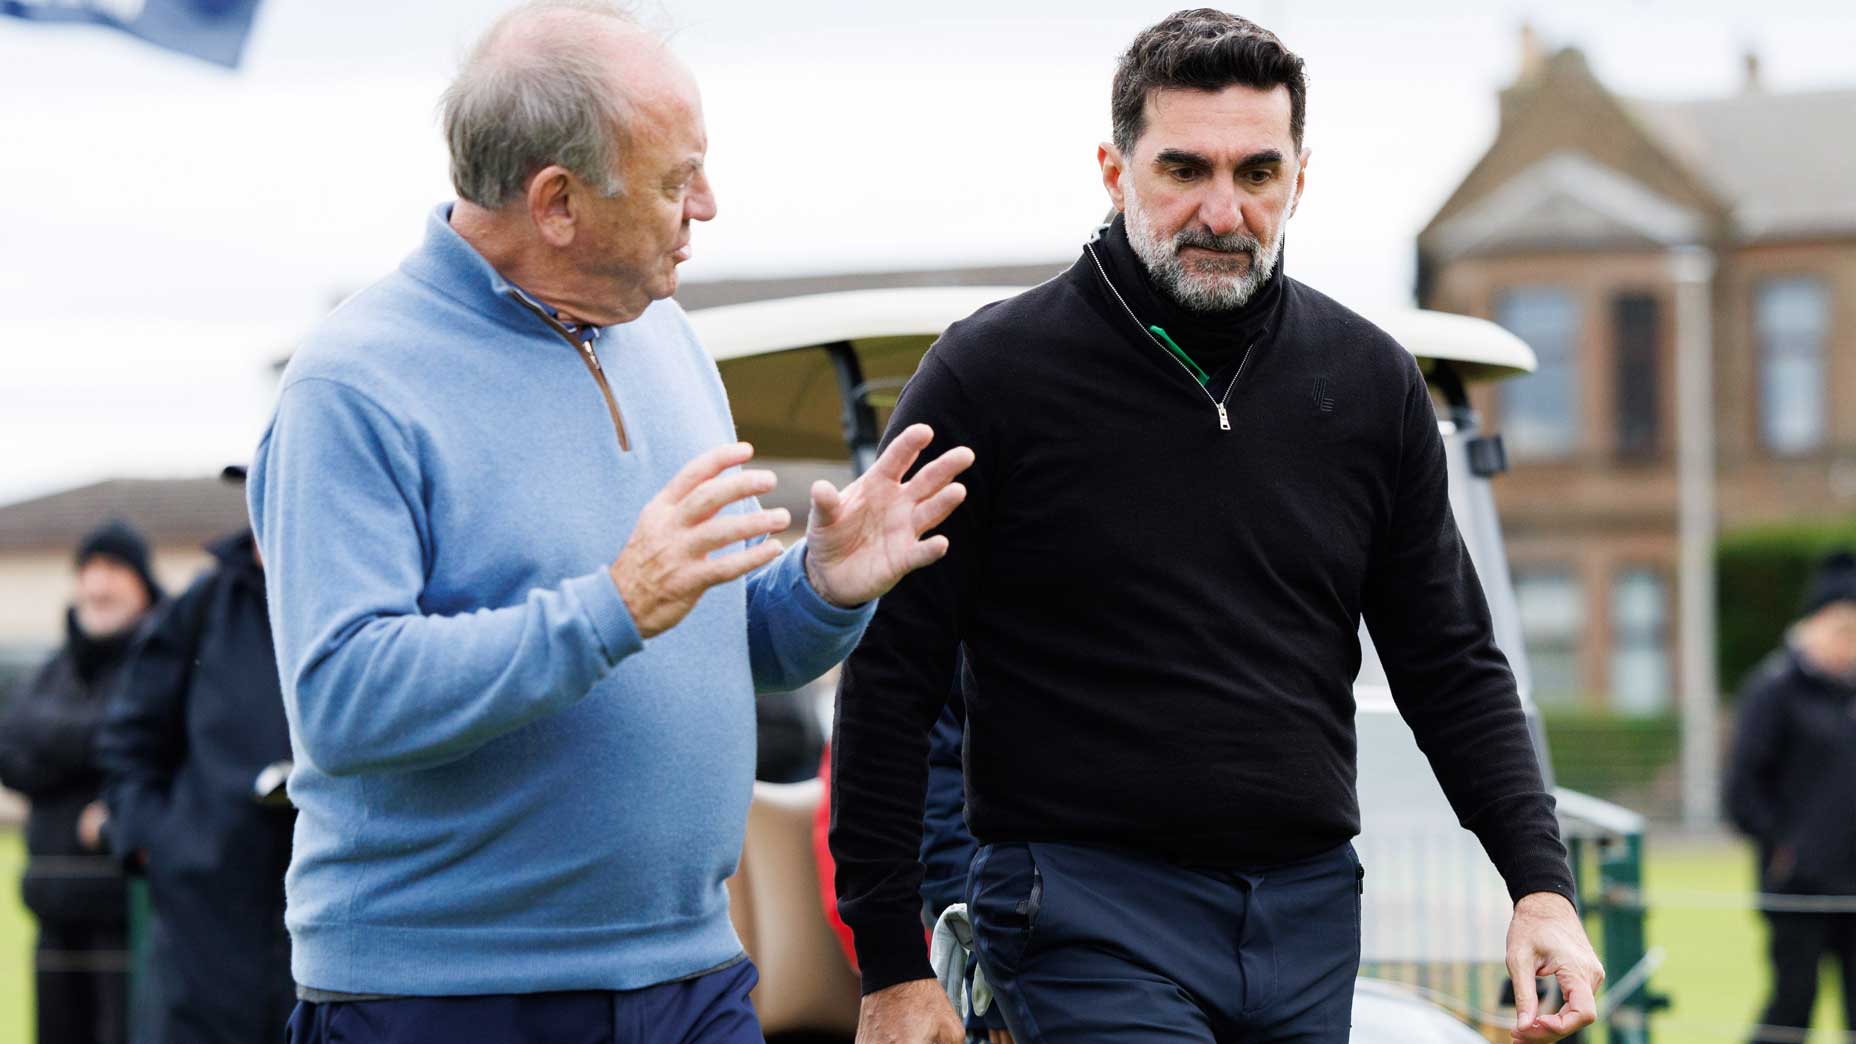 OWGR board chairman Peter Dawson and PIF governor Yasir Al-Rumayyan at the Alfred Dunhill Links Championship at Carnoustie Golf Links, just days before the OWGR announced it had rejected LIV Golf's application.